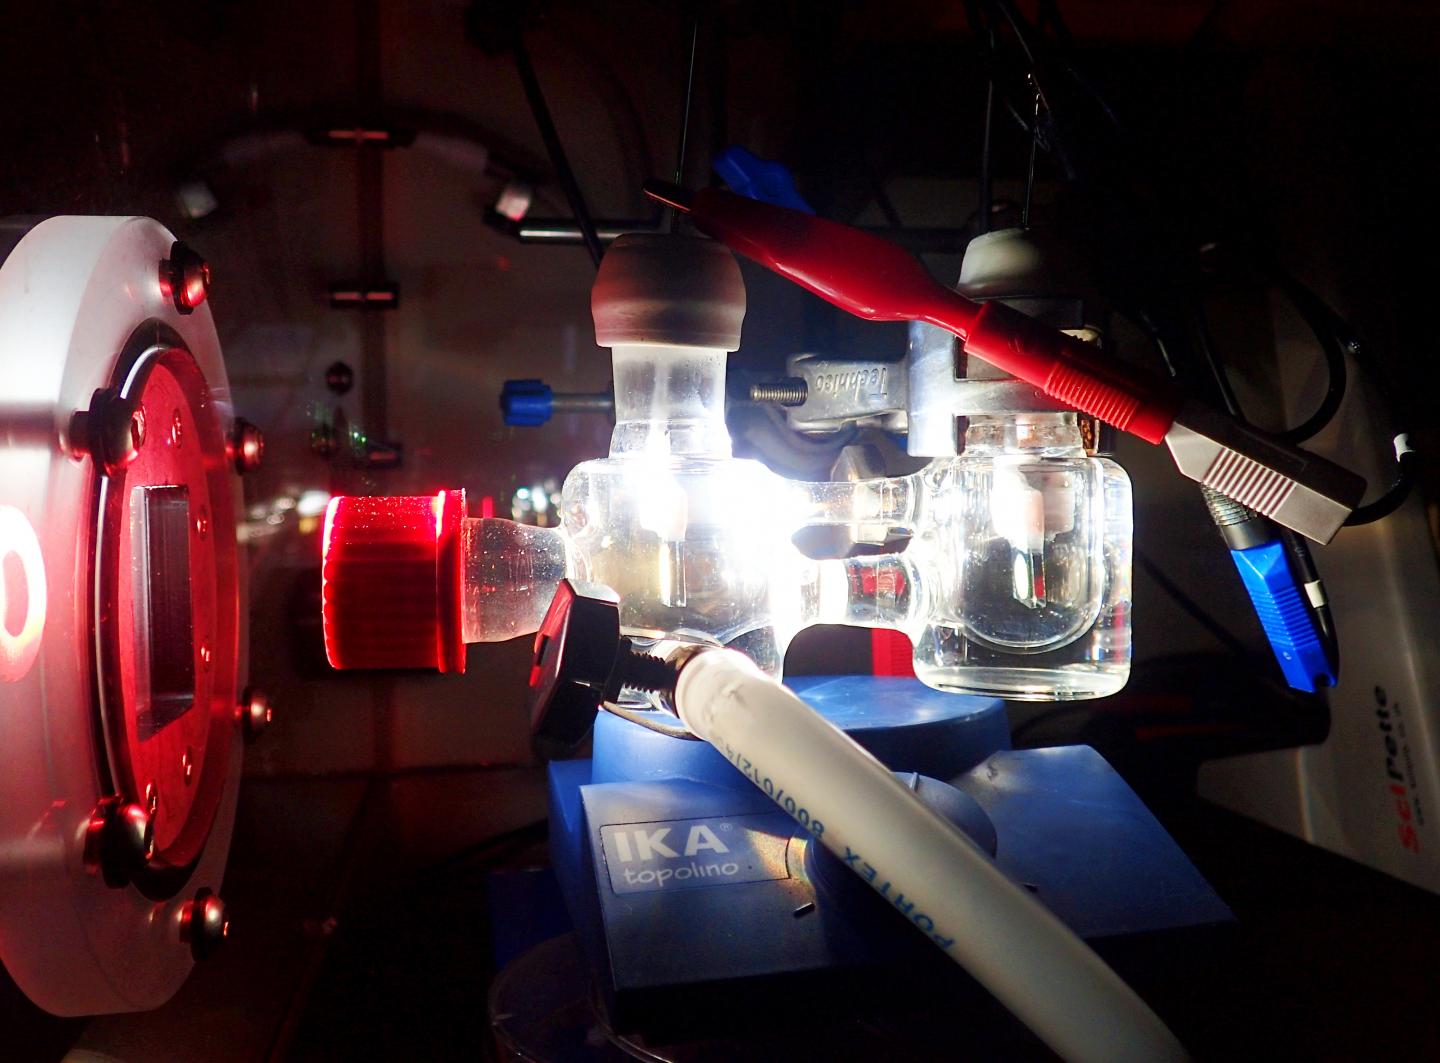 Experimental two-electrode setup showing the photoelectrochemical cell illuminated with simulated solar light. Source: Katarzyna Sokó